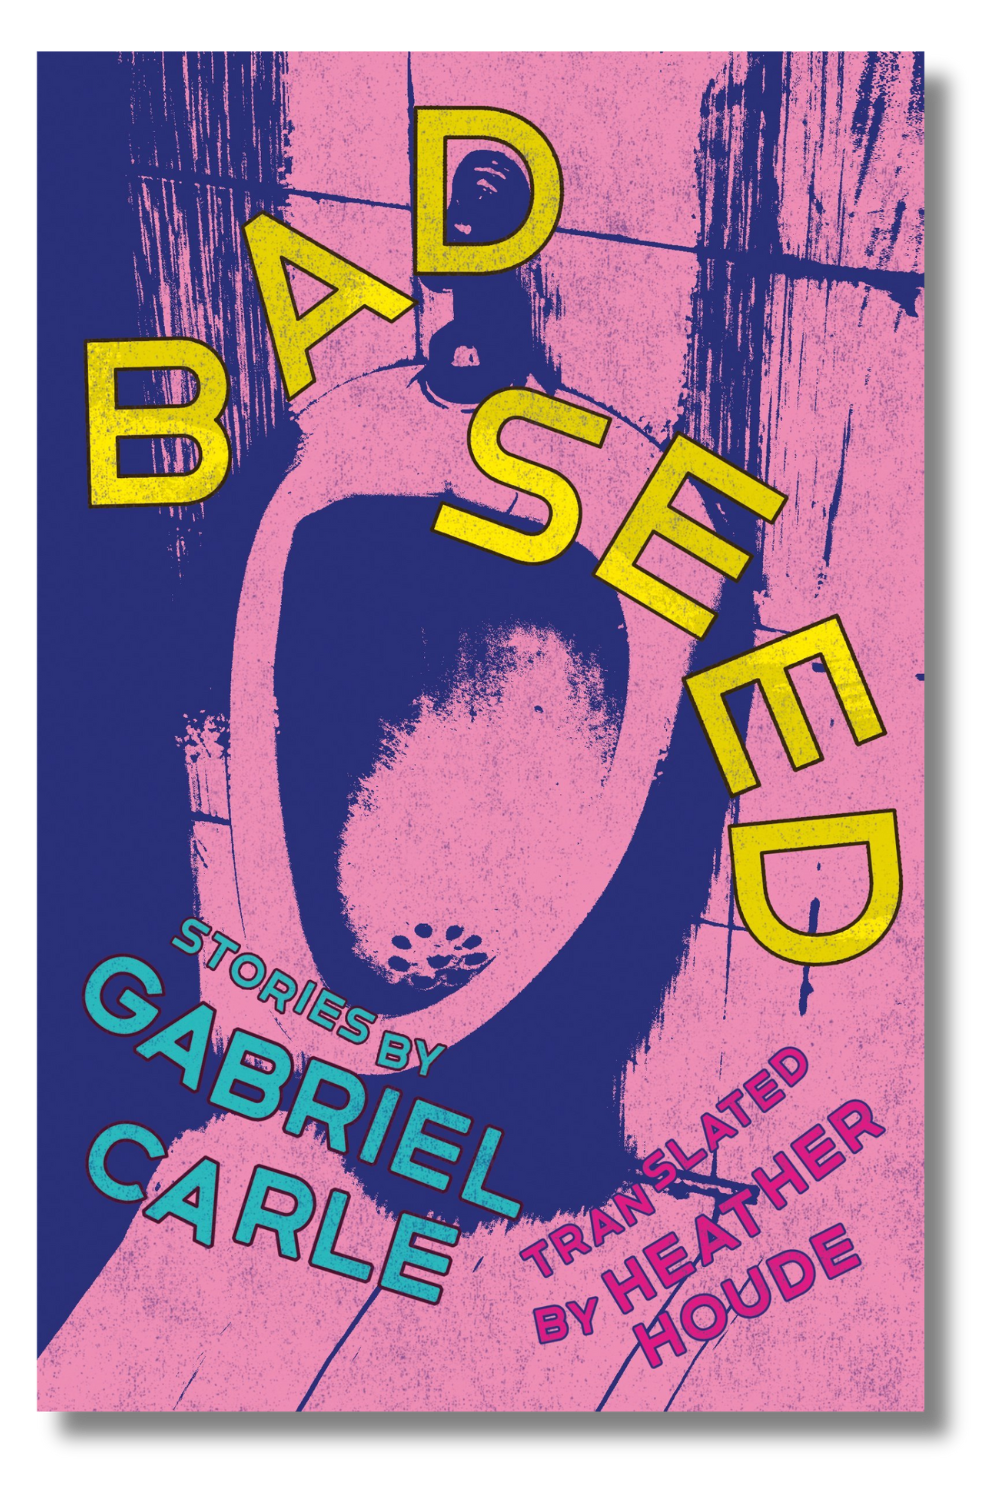 The cover of "Bad Seed" by Gabriel Carle, translated by Heather Houde